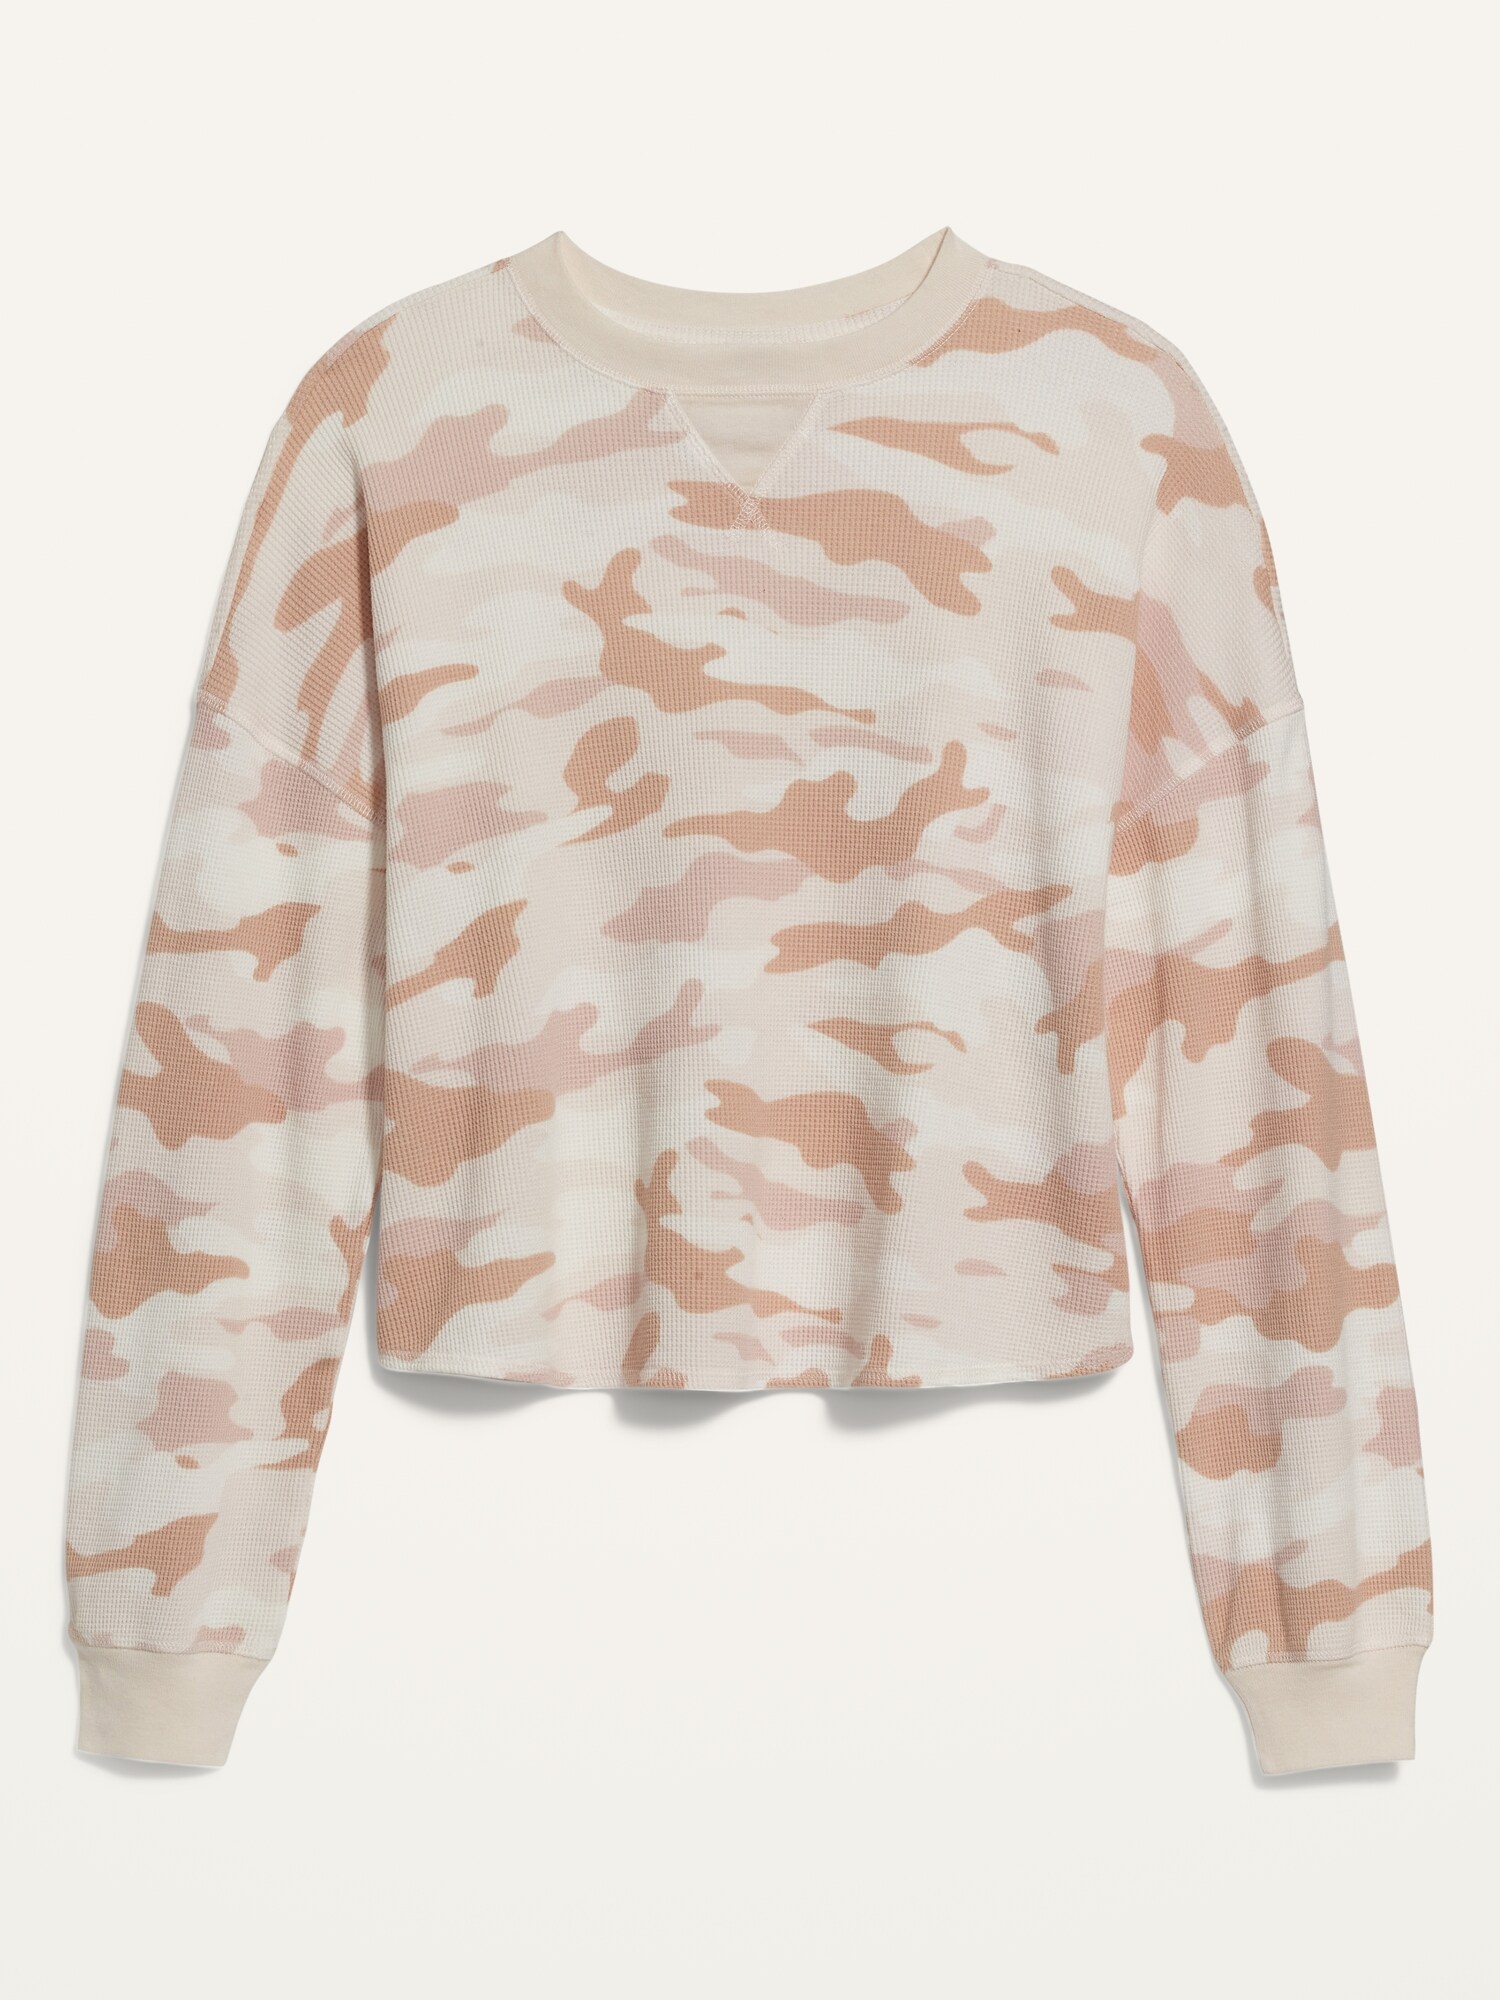 Long-Sleeve Loose Cropped Camo-Print Waffle-Knit Top for Women